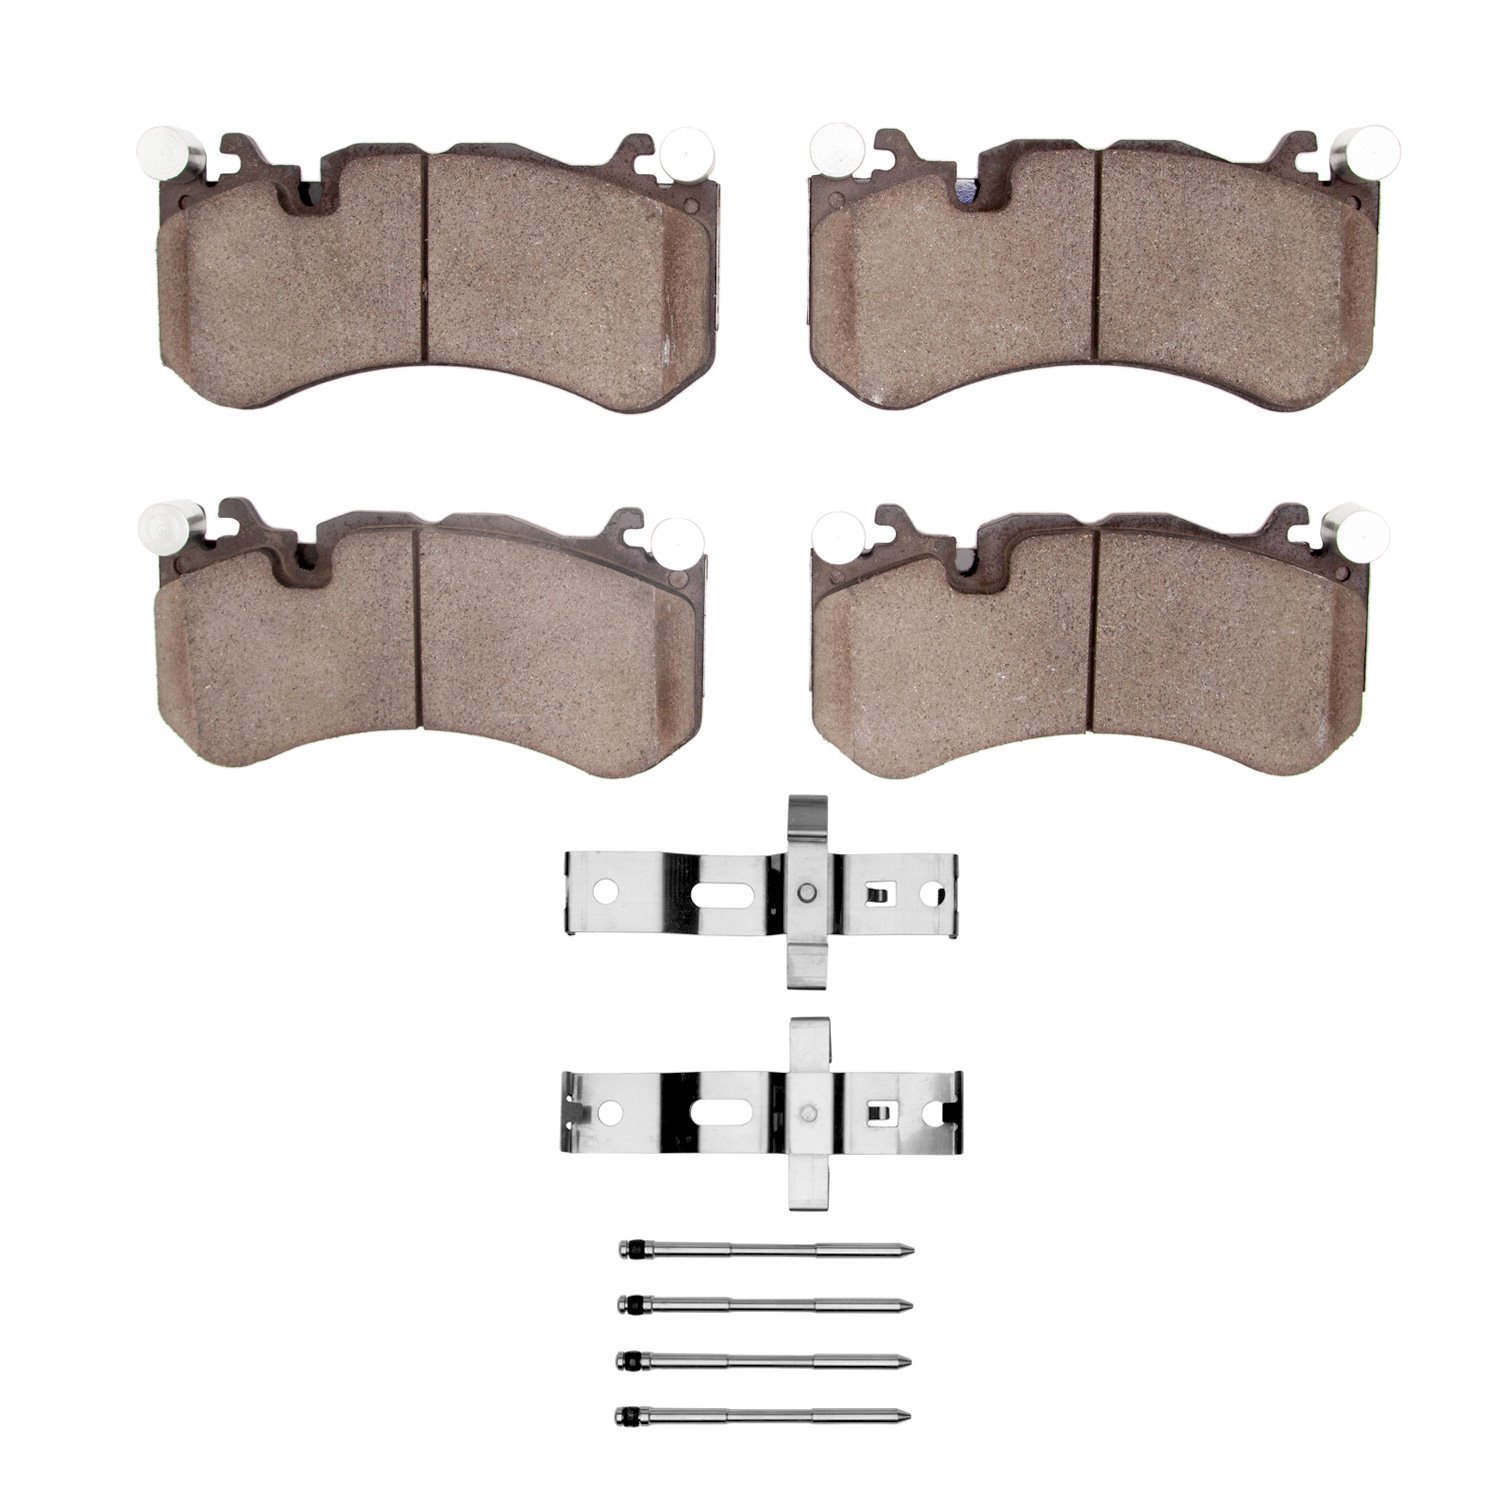 1552-1291-01 5000 Advanced Low-Metallic Brake Pads & Hardware Kit, Fits Select Mercedes-Benz, Position: Front